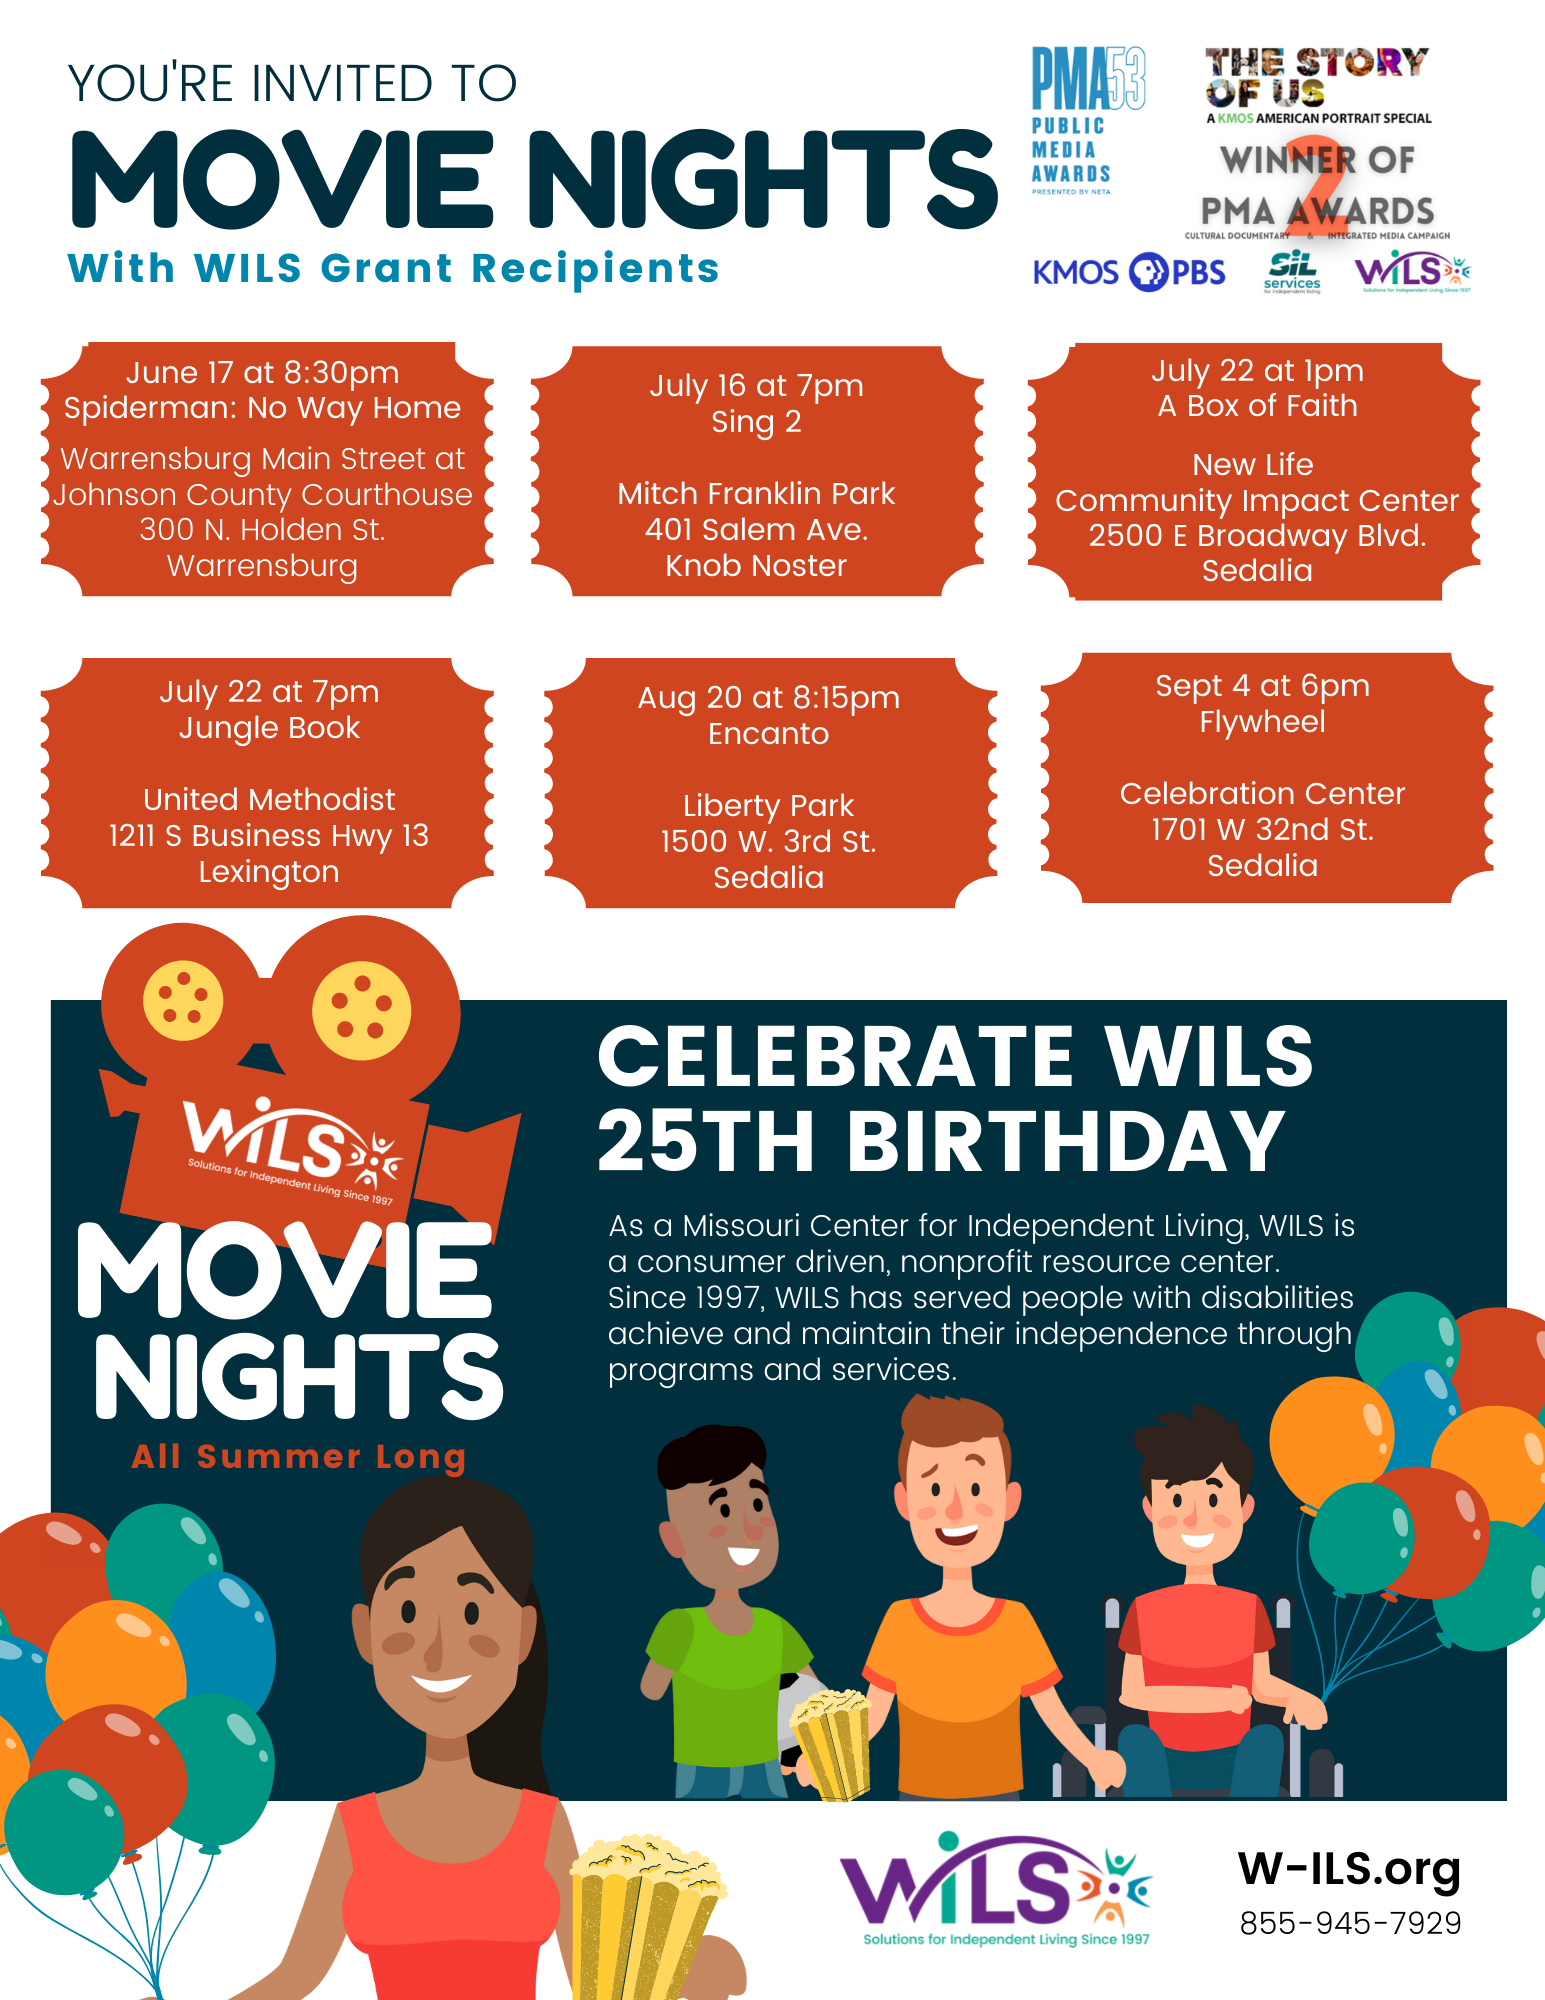 You're invited to movie events with WILS grant recipients. June 17 at 8:30pm Spiderman: No Way Home Warrensburg Main Street at Johnson County Courthouse 300 N. Holden St. Warrensburg. g